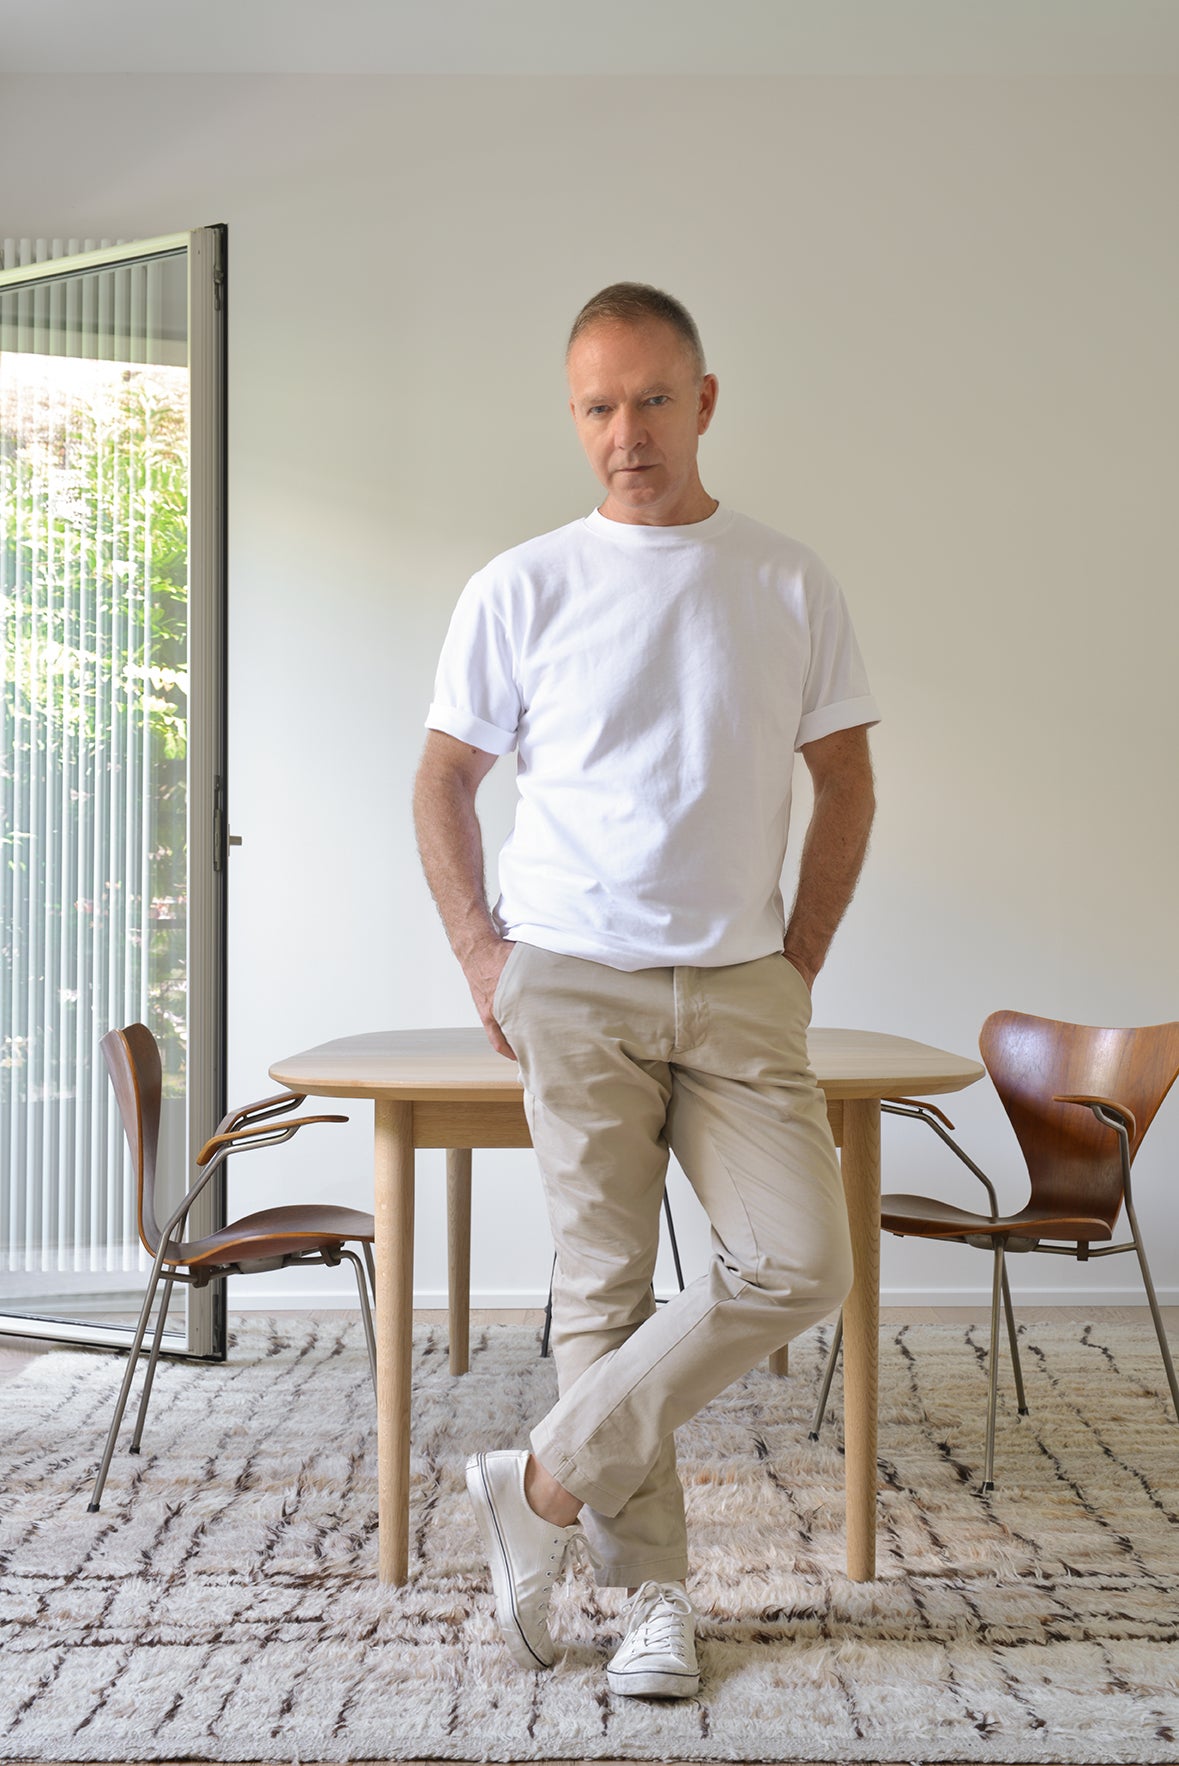 Marco Bertolini in front of dining table